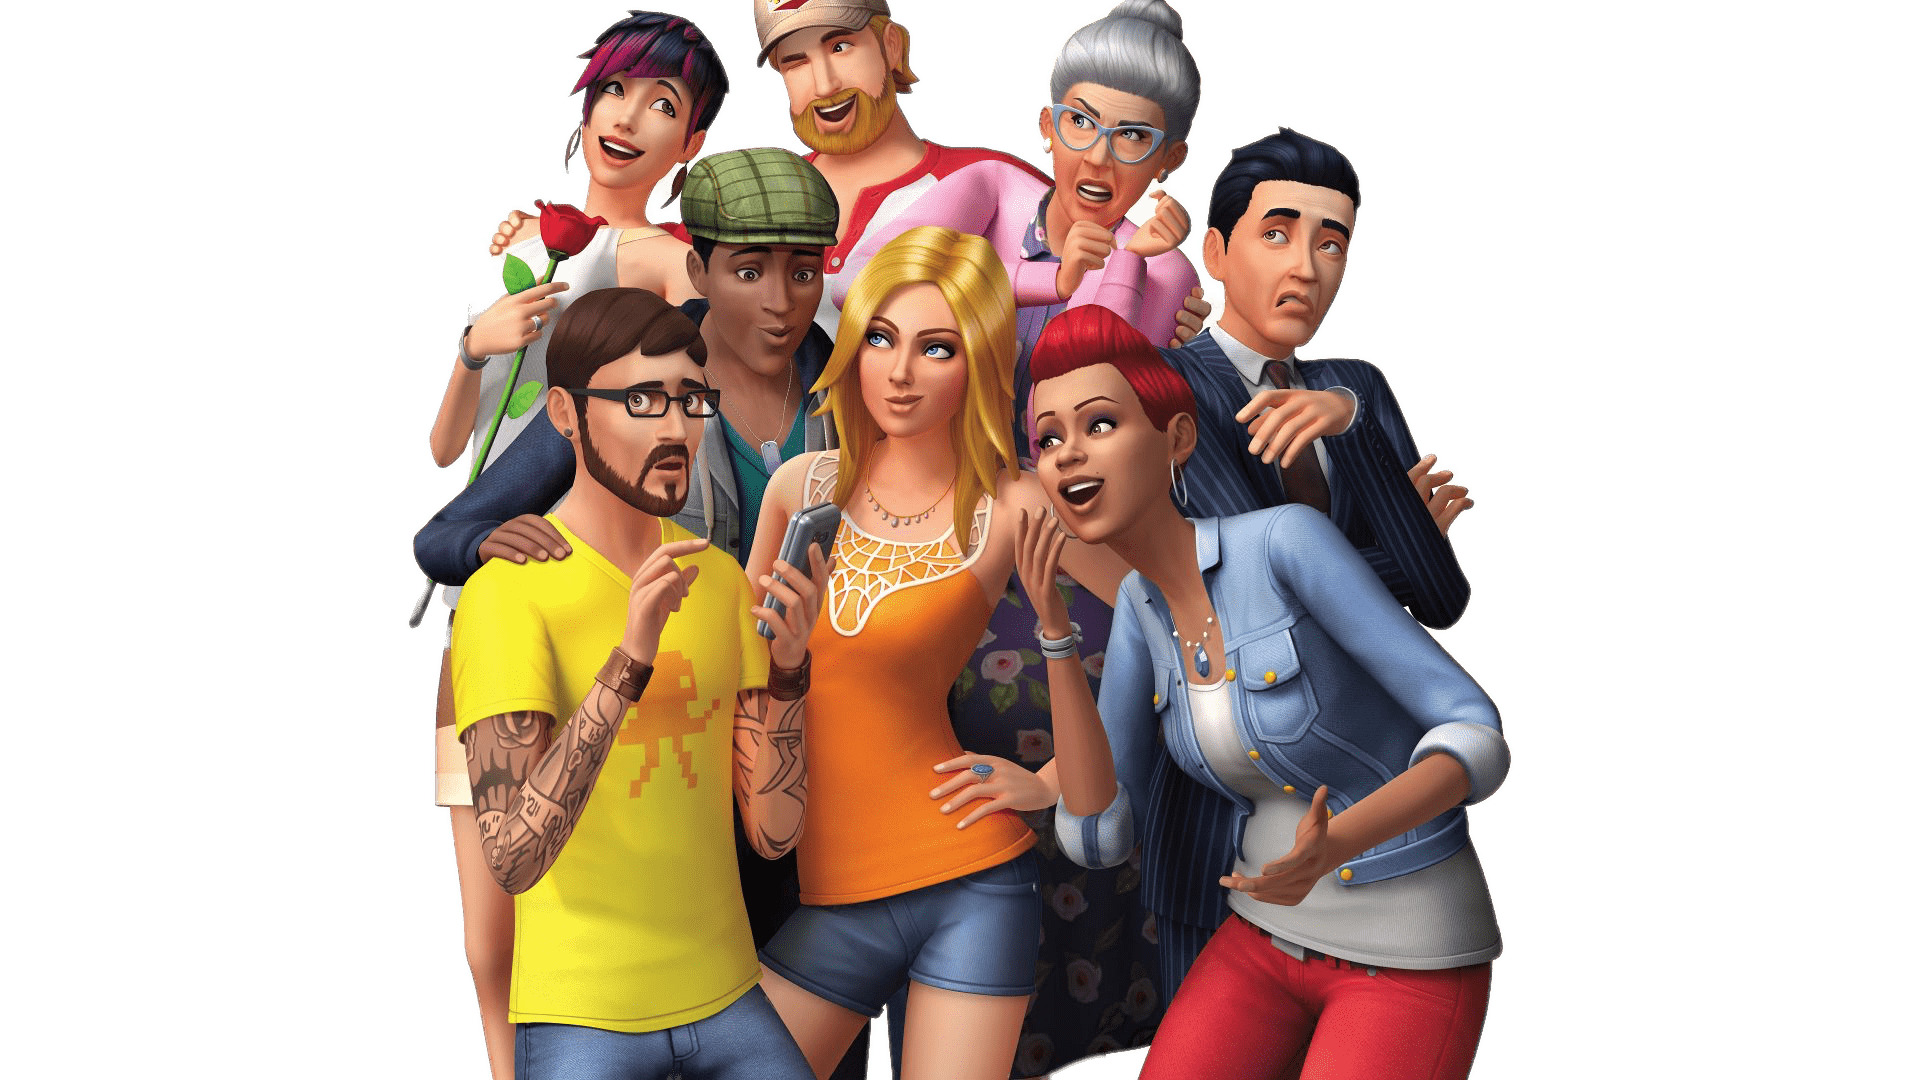 The Sims 4 icons